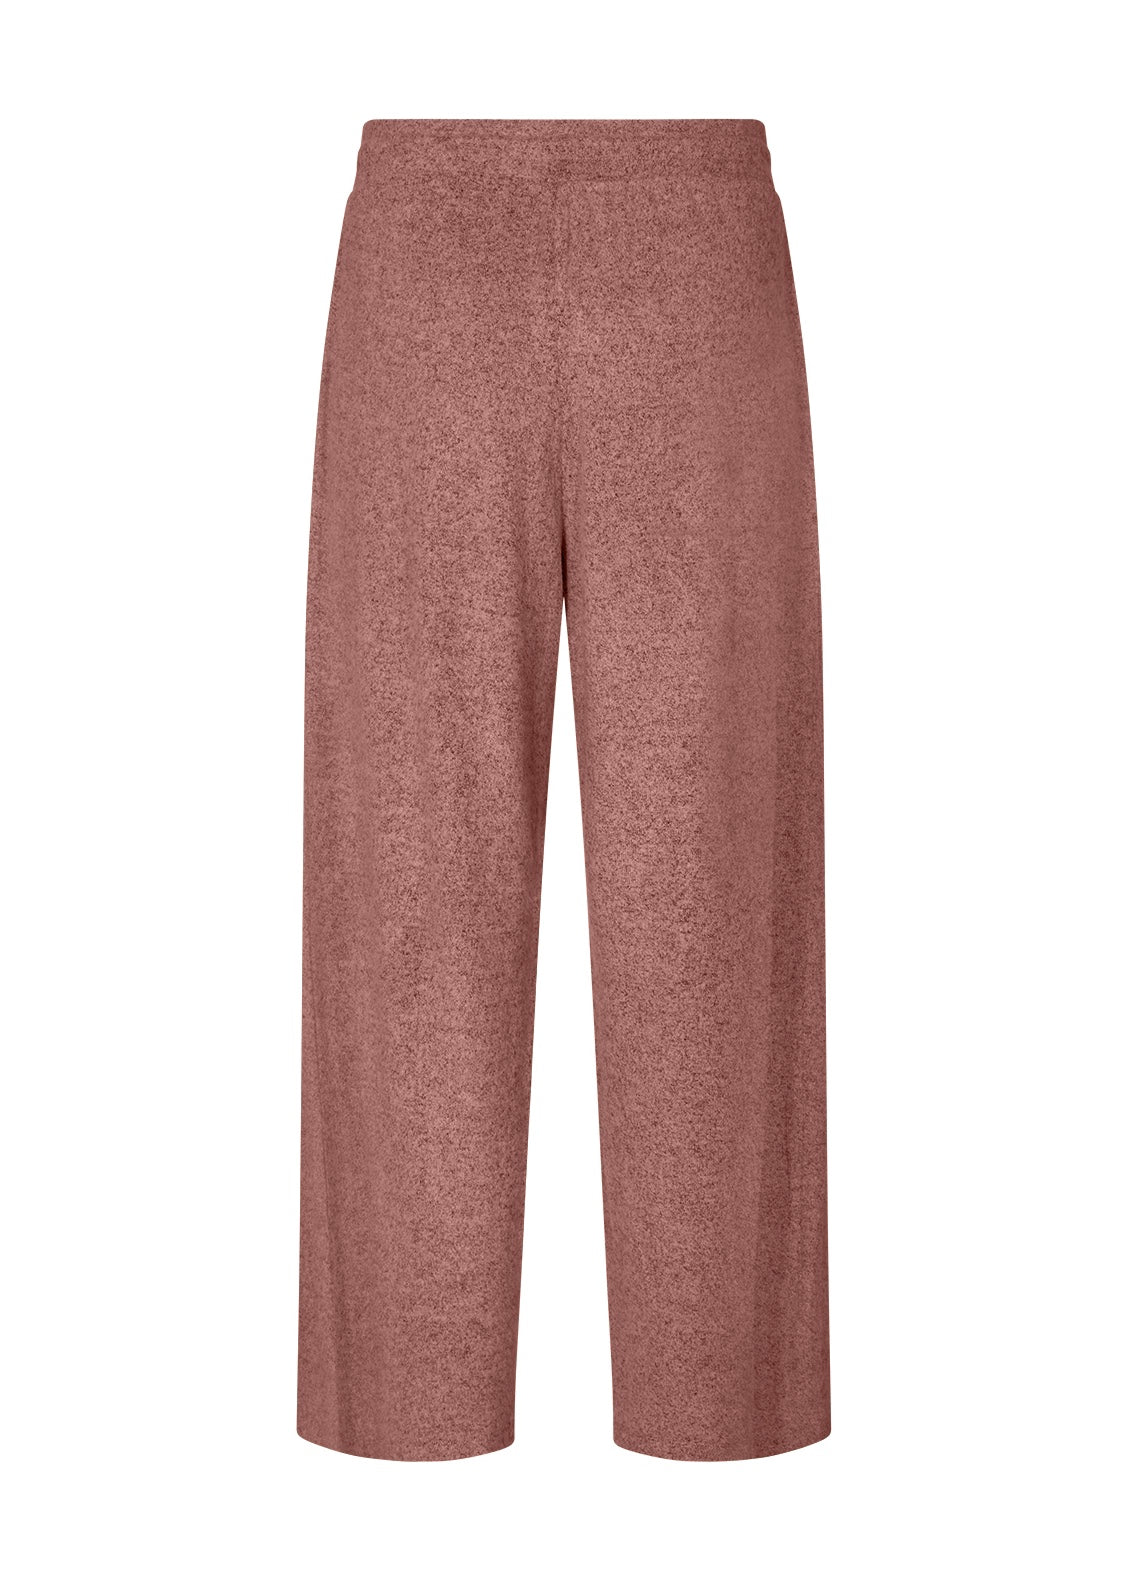 Soyaconcept - Biara Trousers SALE / Rose